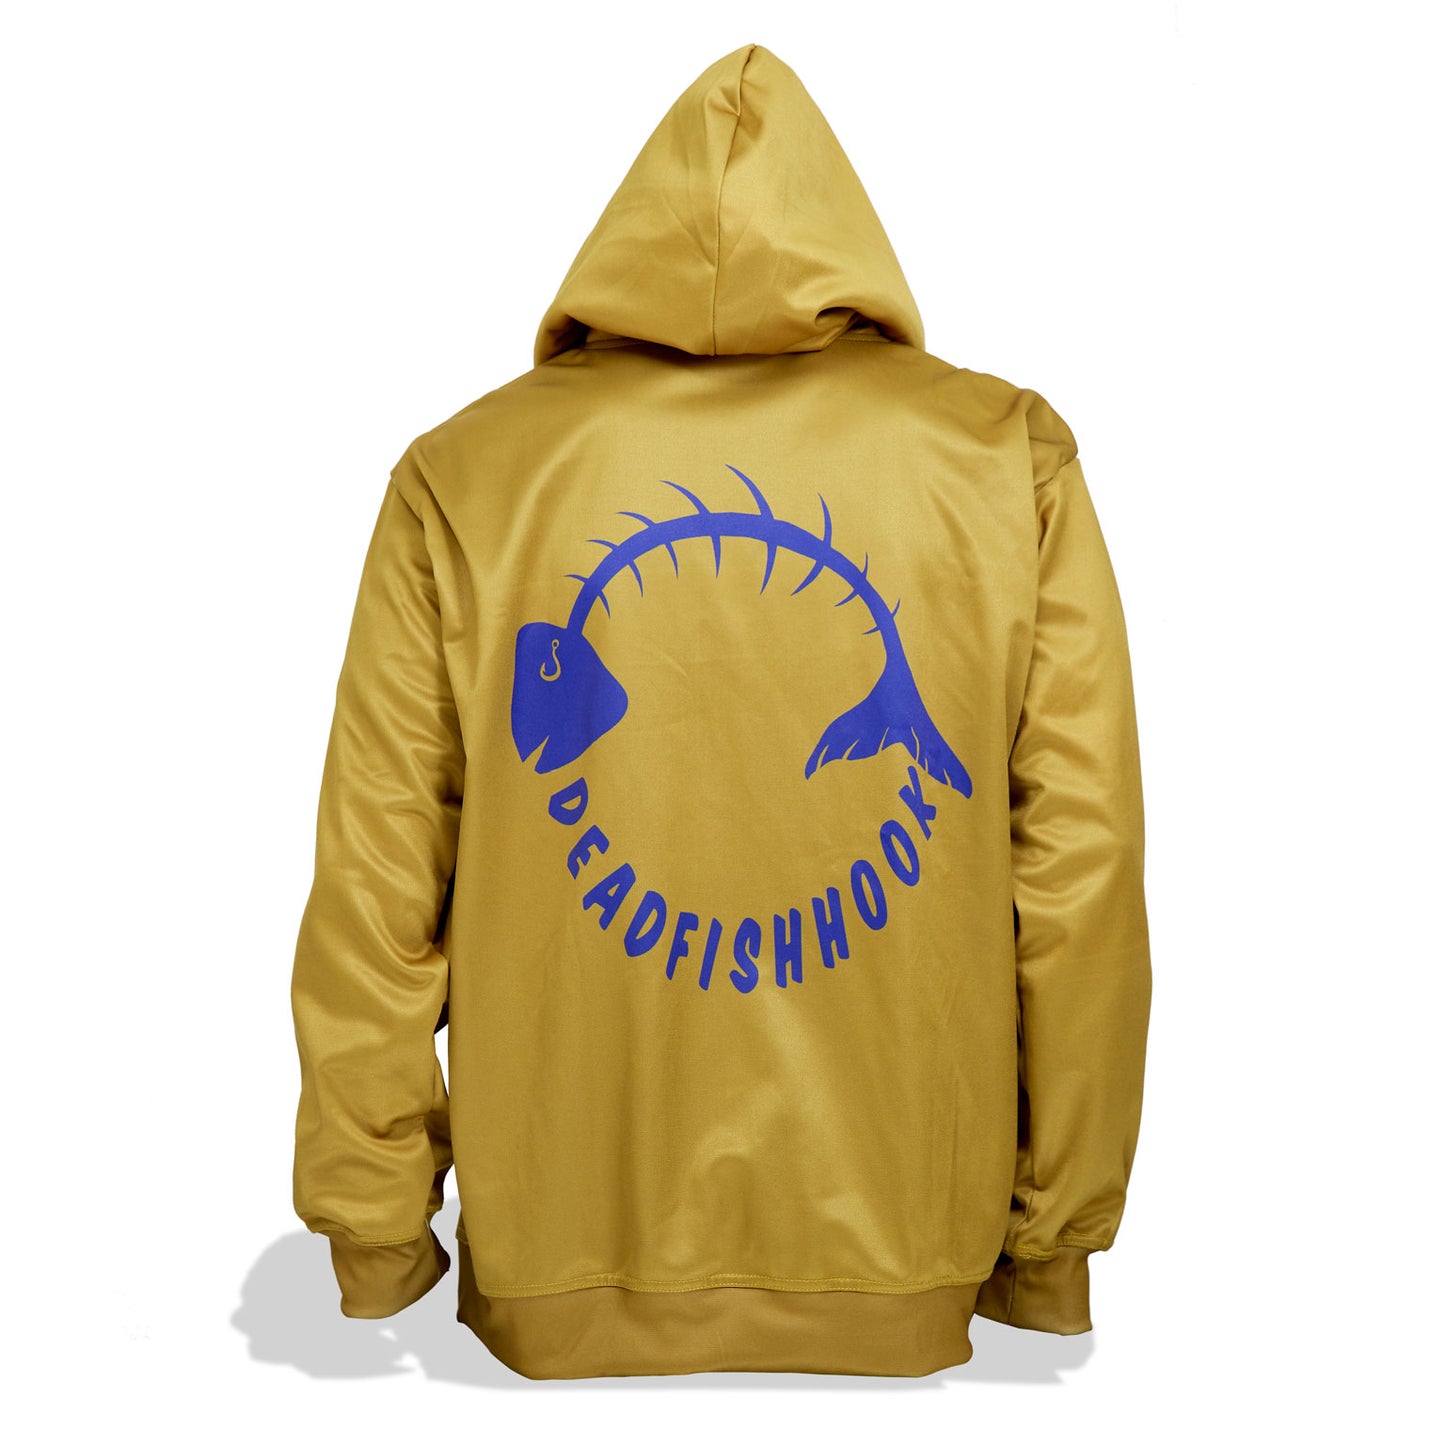 Dead Fish Hook front zipper hoodie jacket gold with fish bone logo center back - back view